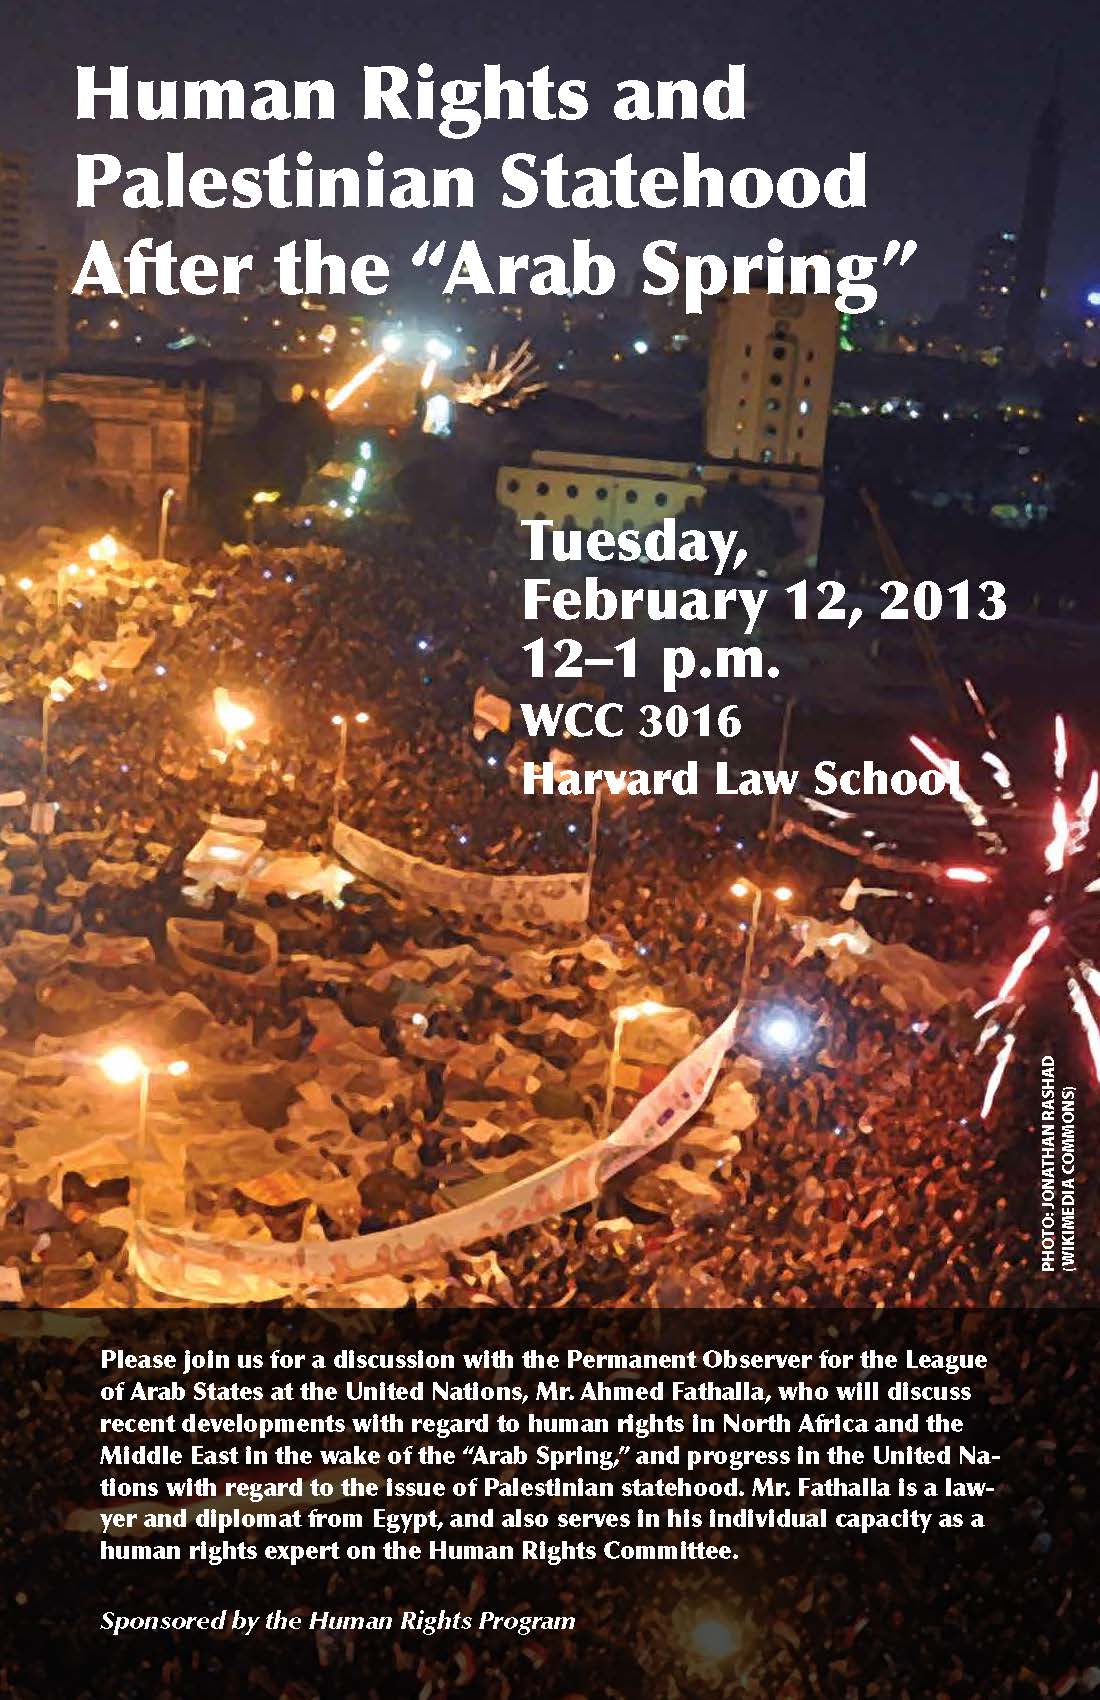 "Human Rights and Palestinian Statehood After the Arab Spring" Poster: mass of people gathered and protesting with signs and fireworks in the background followed by details of the event.